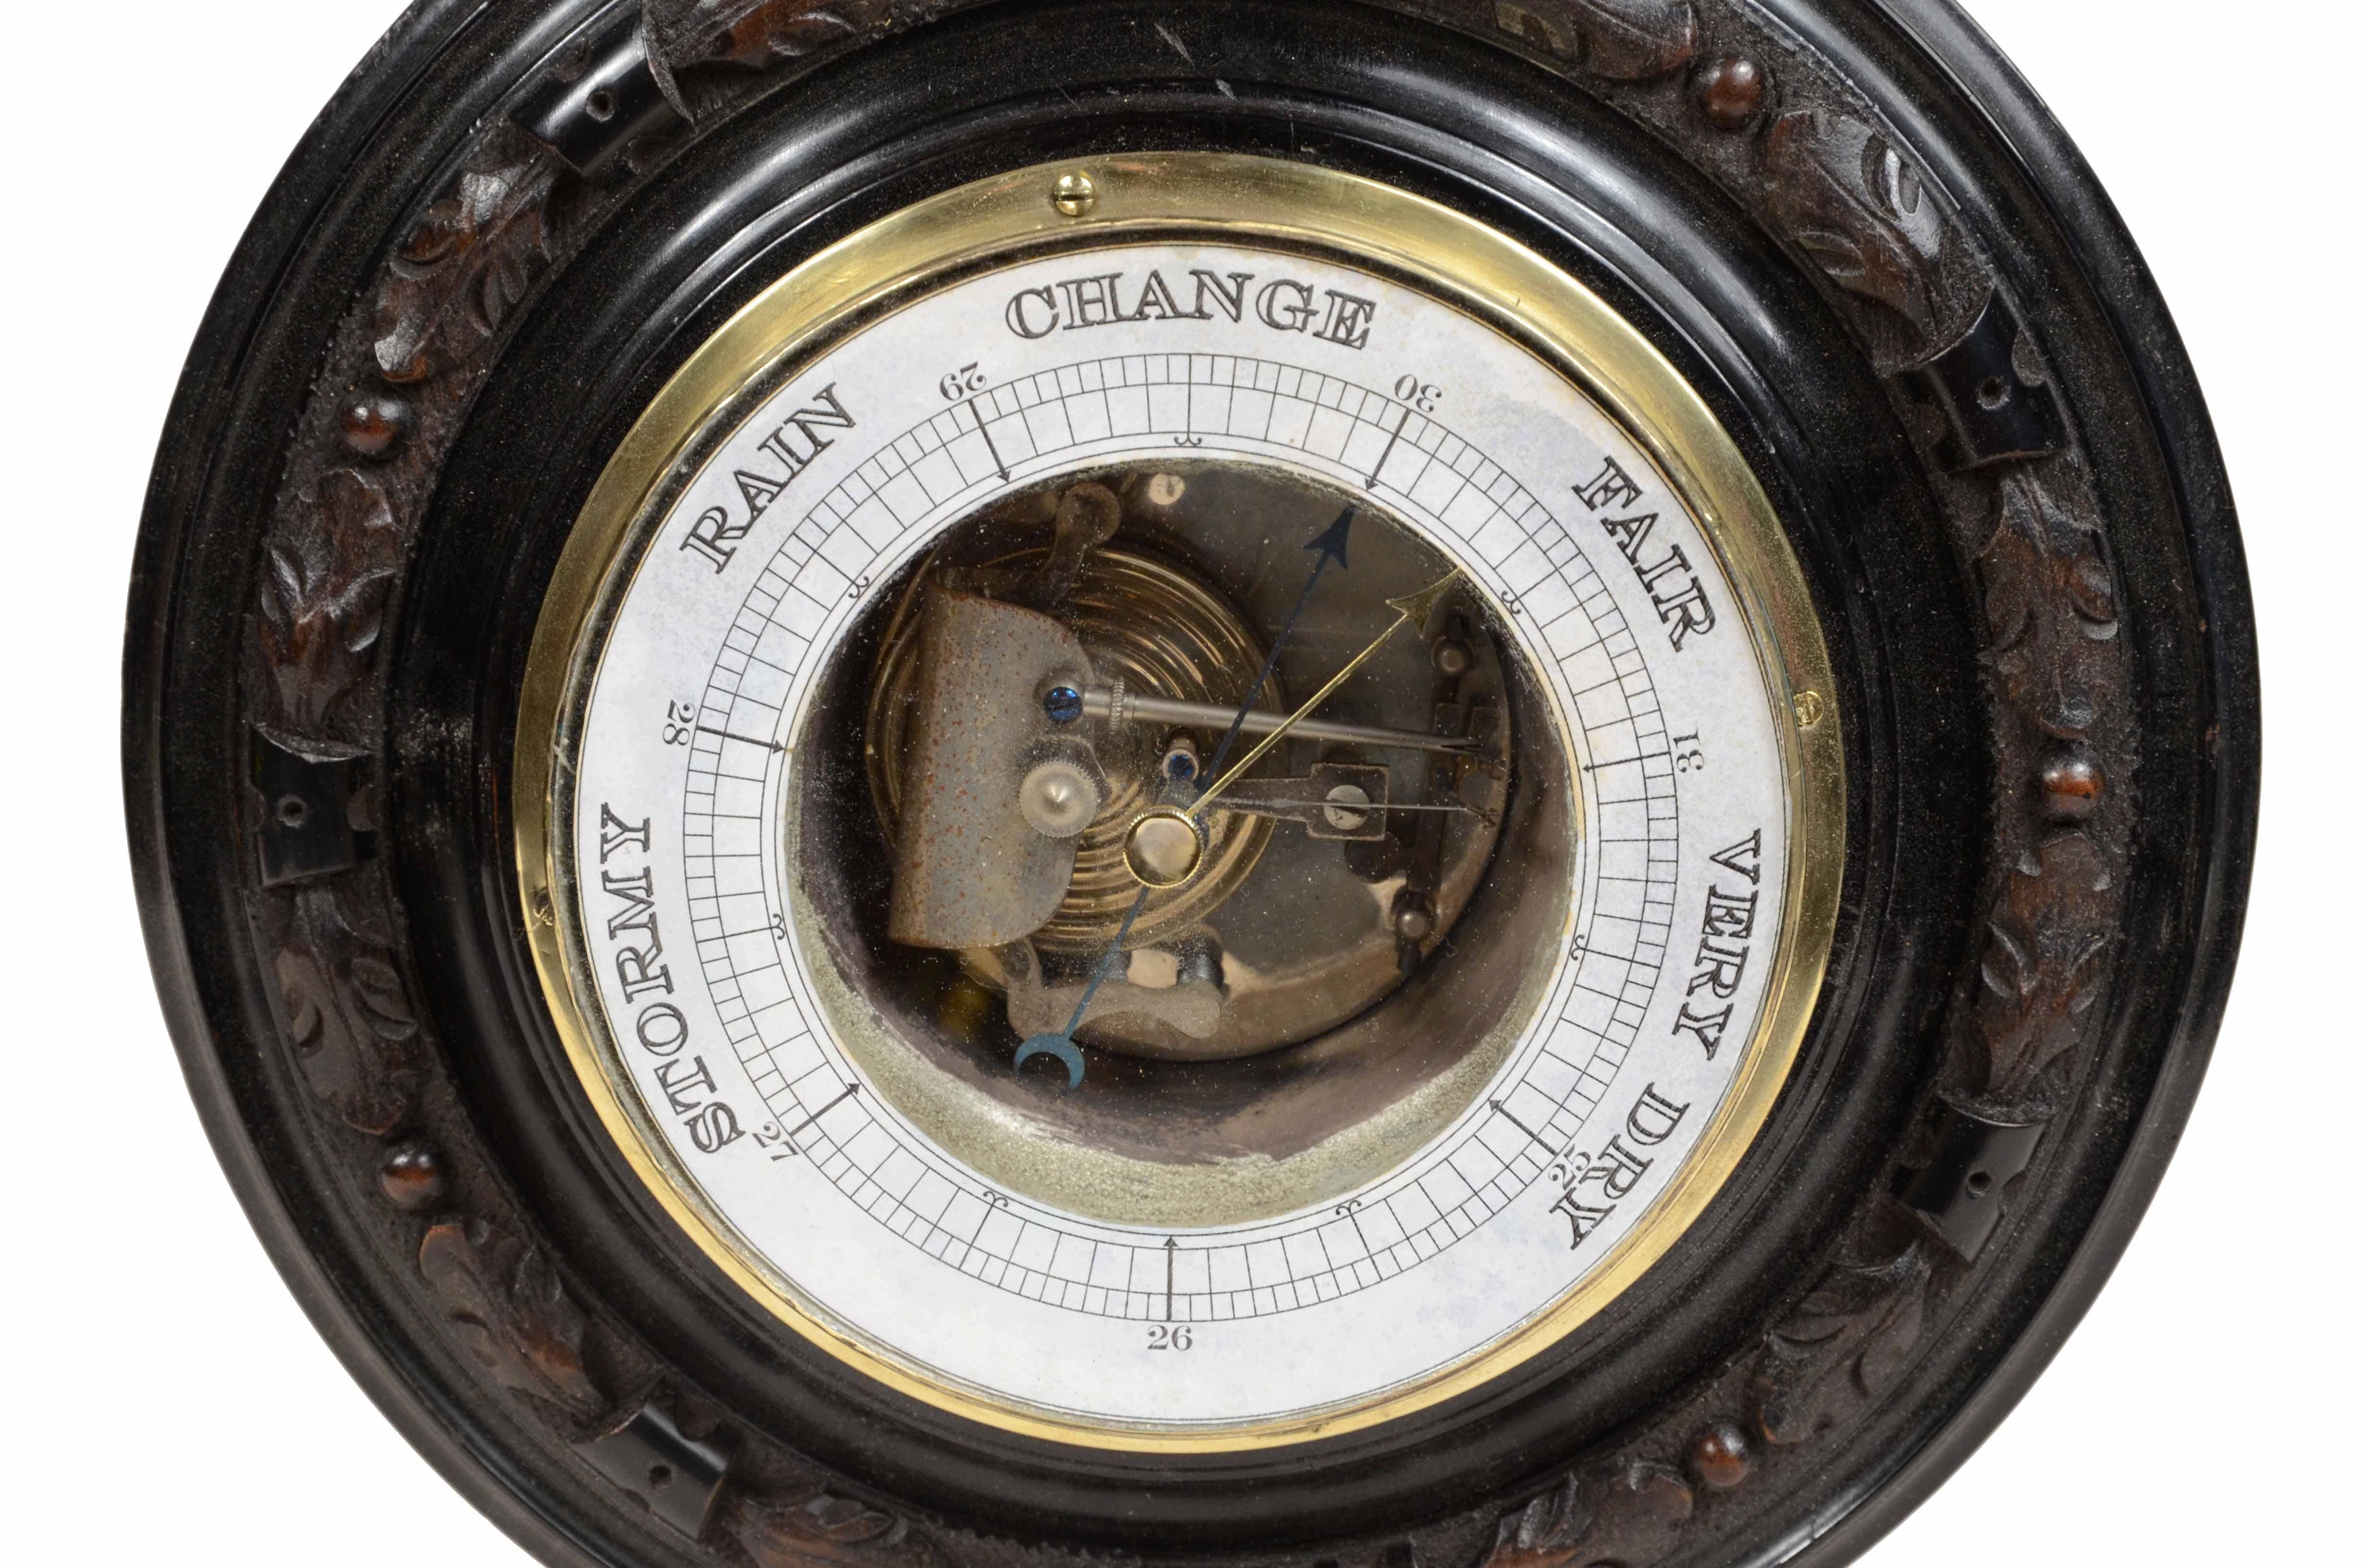 Wall-mounted aneroid barometer made of carved wood, brass, and glass, an instrument whose pressure-sensitive organ is a metal box called a barometric capsule. 
English manufacture of the late 19th century. 
Good condition, working.
Diameter cm 23.3